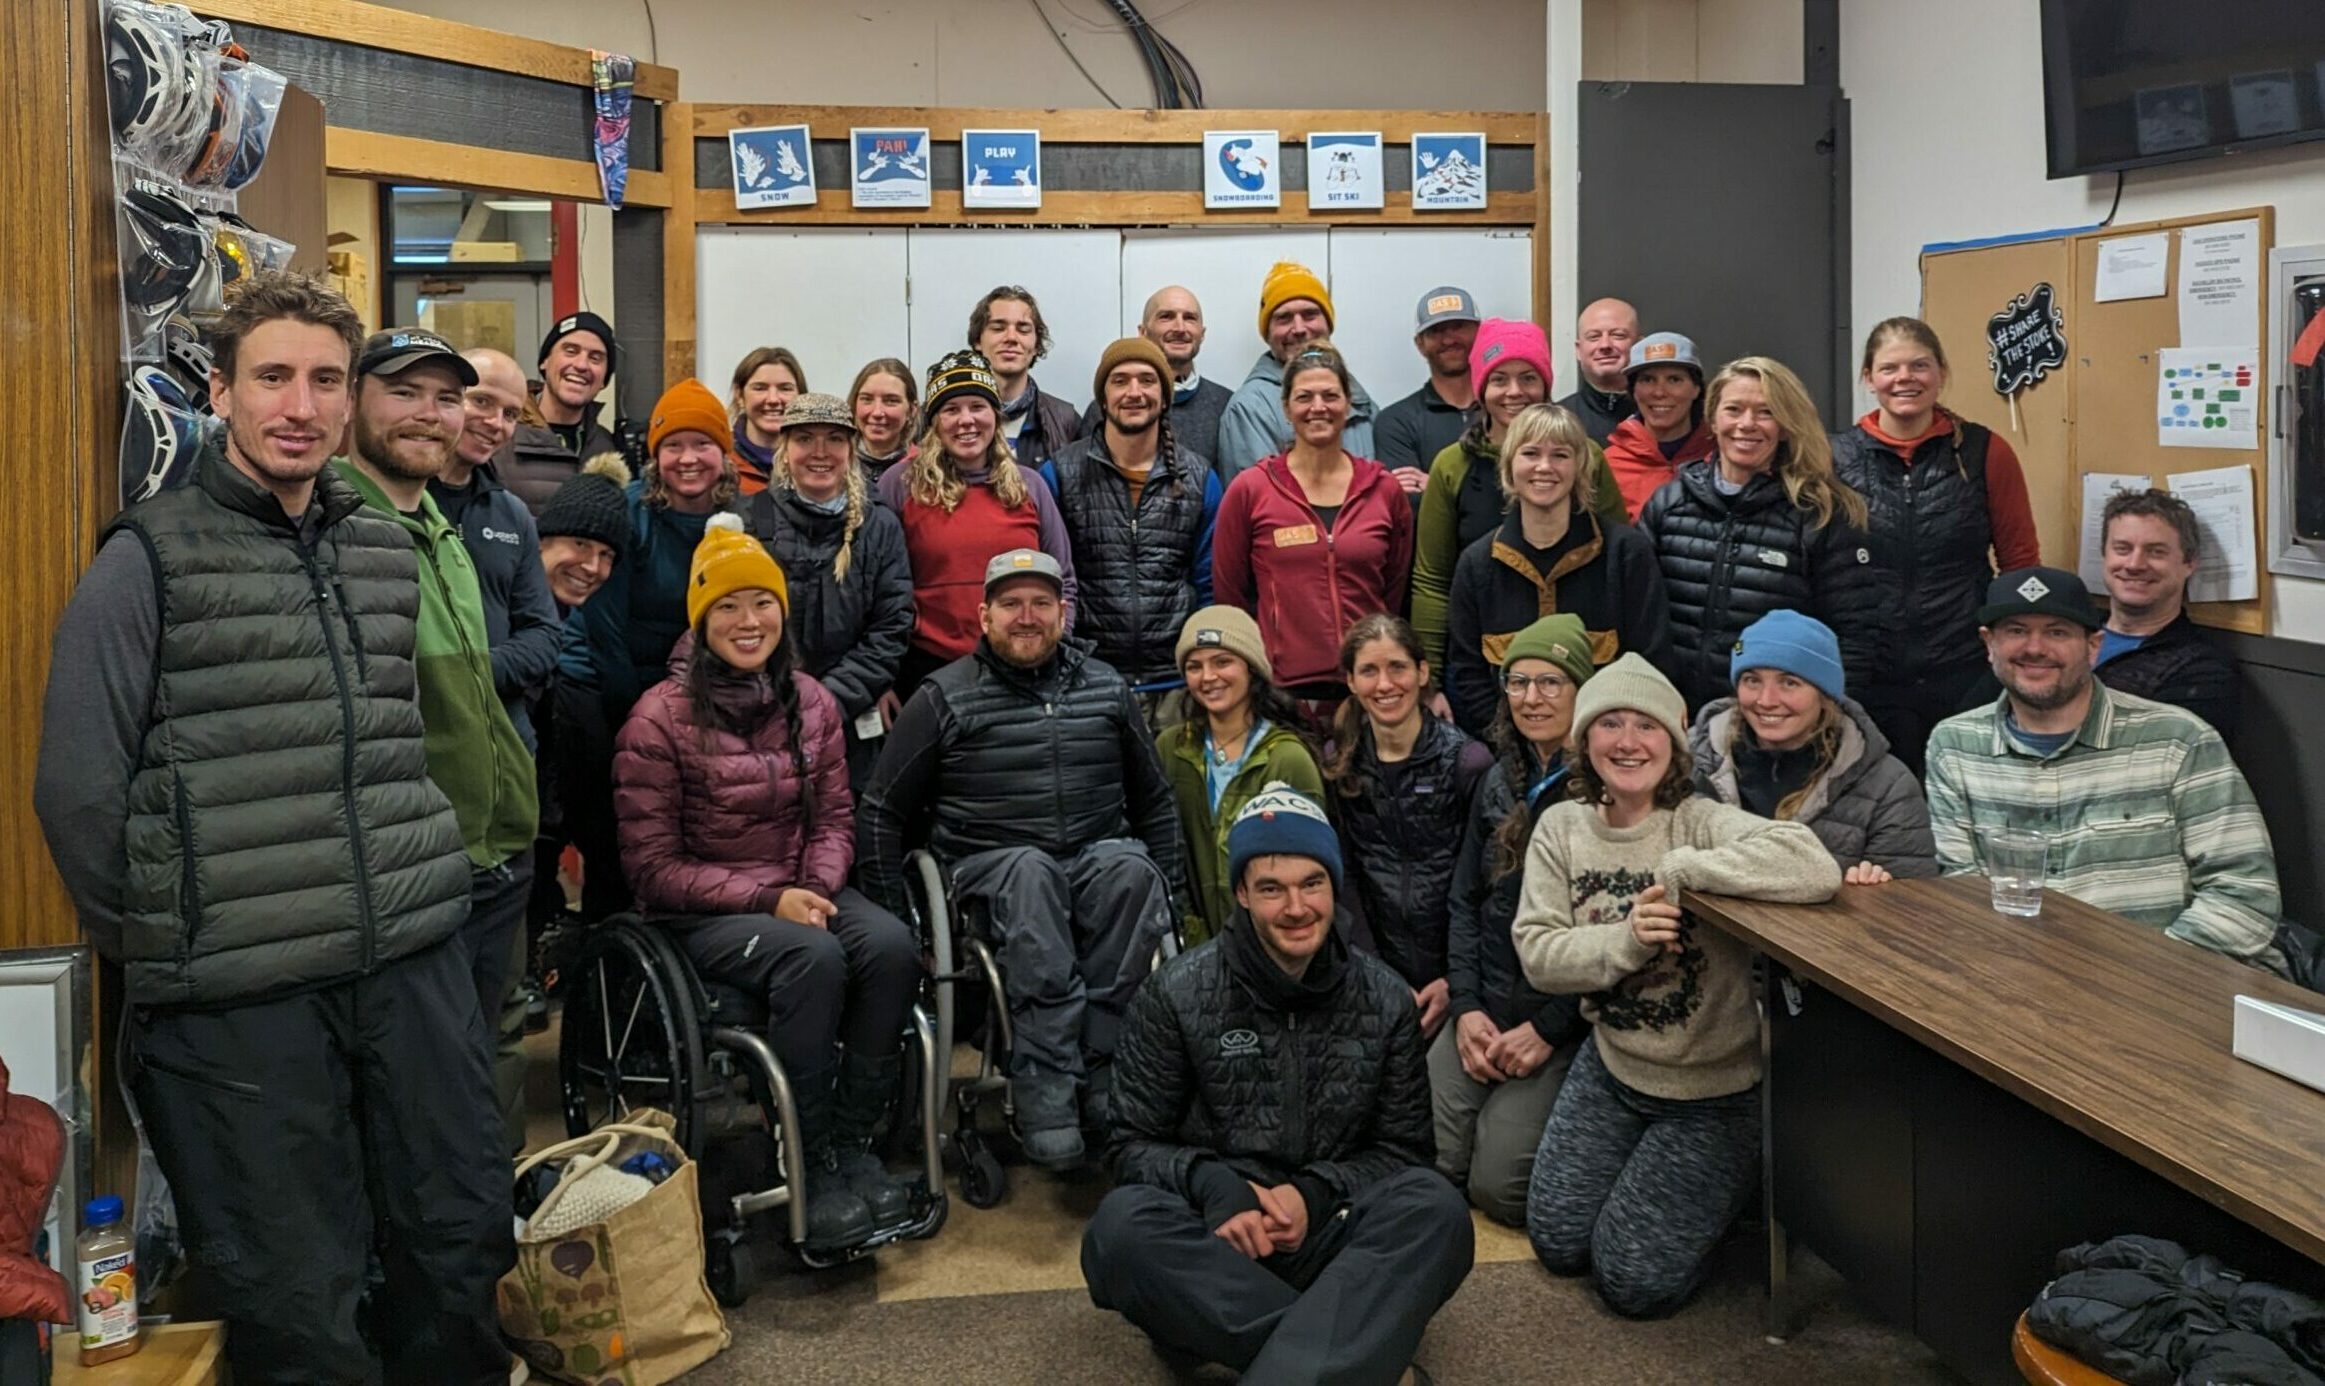 The OAS winter instructor staff packed together for a group photo inside of the OAS Mt Bachelor office. Many are wearing beanies and puffy jackets after a day of training out on the snow.